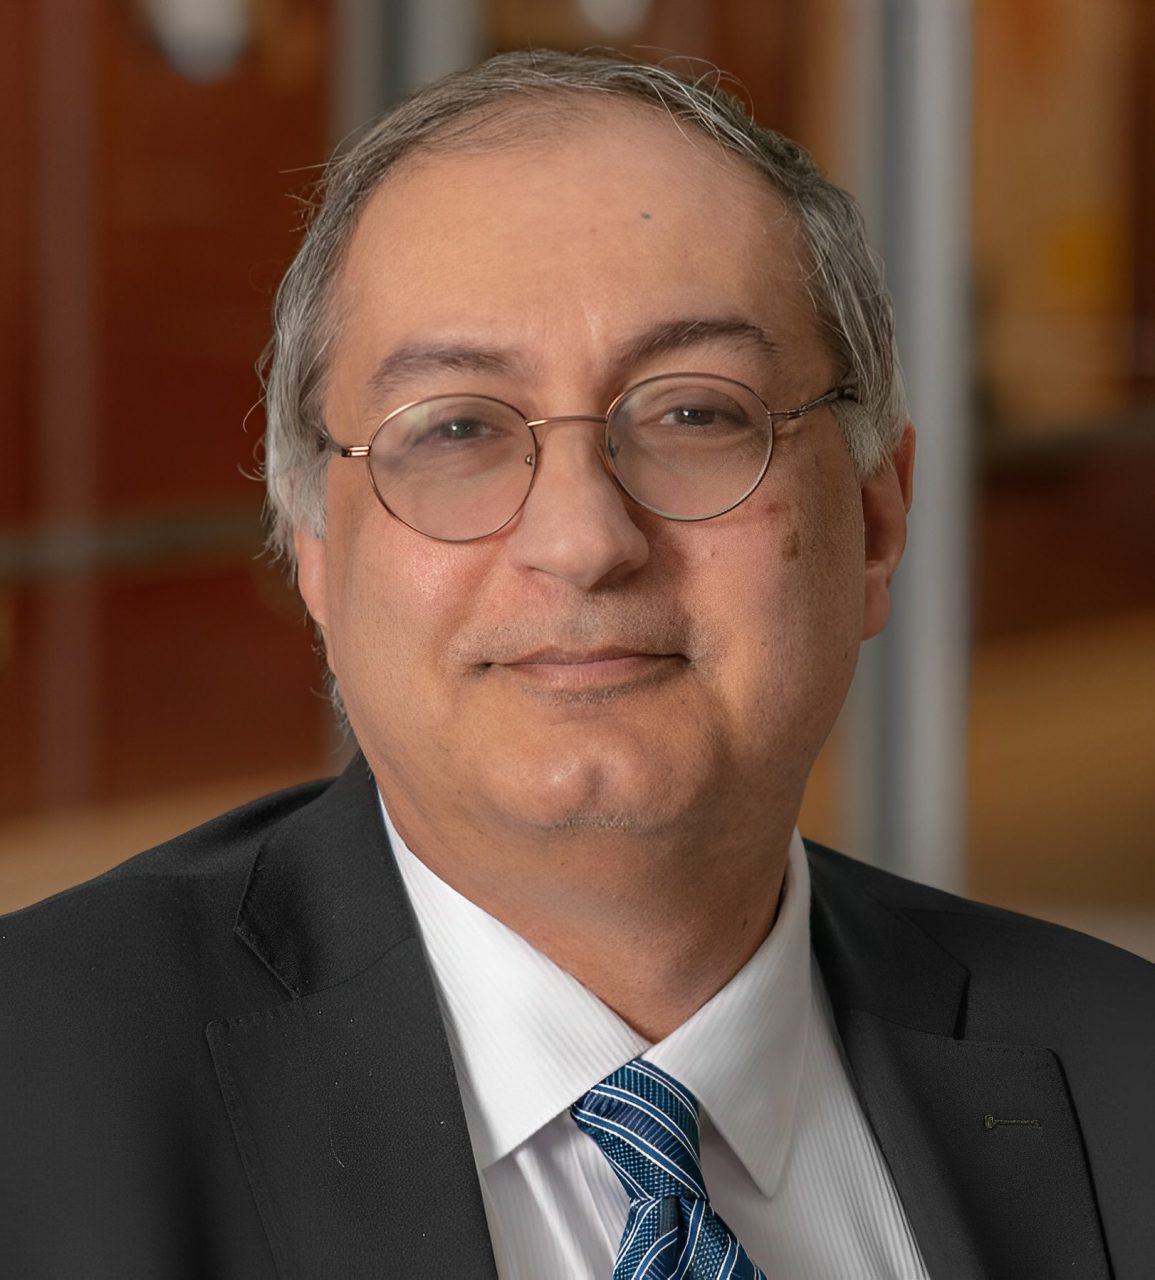 Wafik S. El-Deiry: Looking forward to attending the largest scientific gathering on cancer research in the world – AACR24